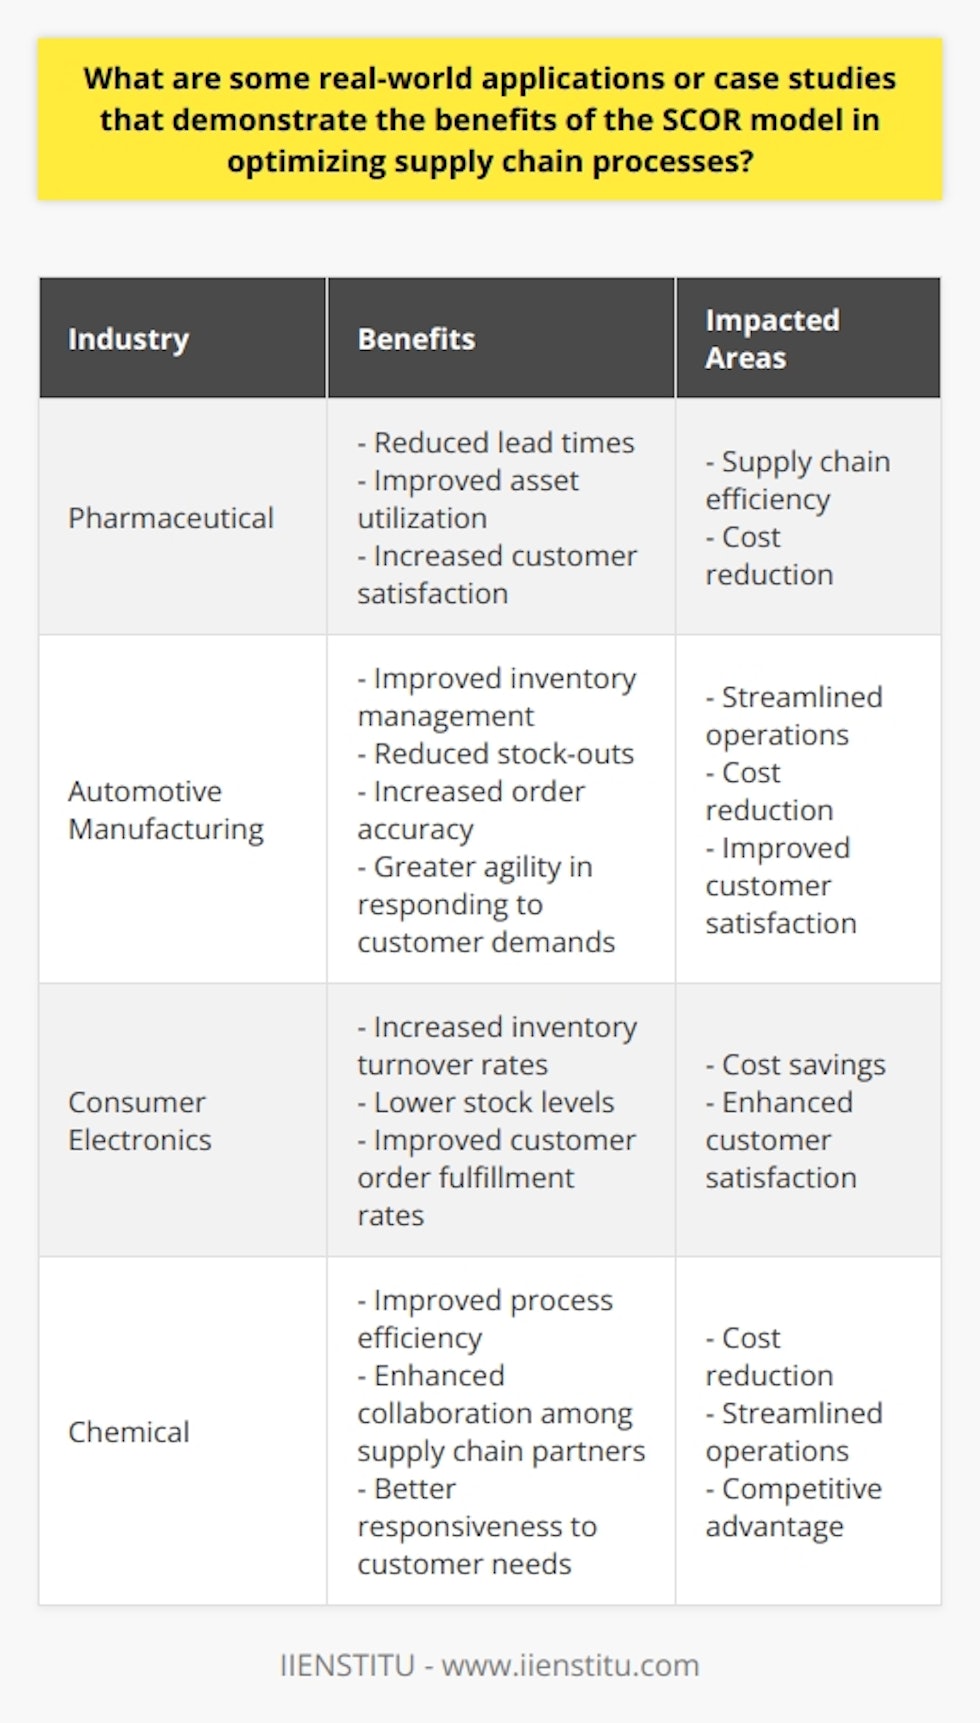 The SCOR (Supply Chain Operations Reference) model has been widely recognized and applied in several industries to optimize supply chain processes. Real-world case studies provide evidence of the model's effectiveness in enhancing supply chain efficiency, reducing costs, and improving customer satisfaction. Some notable applications include the pharmaceutical industry, automotive manufacturing, consumer electronics, and the chemical industry.In the pharmaceutical industry, the SCOR model has been used to identify performance gaps and areas for improvement within supply chain operations. With the aid of the model, a major global pharmaceutical company was able to significantly reduce lead times, improve asset utilization, and increase customer satisfaction. These improvements resulted in enhanced supply chain efficiency and cost reduction.The SCOR model has also proven valuable in the automotive manufacturing industry. By optimizing supply chain processes, an European automotive organization achieved improved inventory management, reduced stock-outs, increased order accuracy, and greater agility in responding to customer demands. These enhancements contributed to streamlined operations, reduced costs, and improved customer satisfaction.Furthermore, consumer electronics companies have realized the benefits of the SCOR model in optimizing their supply chain processes. By applying the model to logistics operations, a major electronics retailer experienced increased inventory turnover rates, lower stock levels, and improved customer order fulfillment rates. These improvements resulted in cost savings and enhanced customer satisfaction, illustrating the value of the SCOR model in this sector.The chemical industry has also benefitted from the optimization capabilities of the SCOR model. By implementing the model in supply chain operations, a leading global chemical company achieved improved process efficiency, enhanced collaboration among supply chain partners, and better responsiveness to customer needs. These improvements not only optimized supply chain processes but also provided a competitive advantage by reducing costs and streamlining operations.In conclusion, real-world applications of the SCOR model across various industries demonstrate its effectiveness in optimizing supply chain processes. Through the identification of performance gaps, adoption of best practices, and benchmarking of performance metrics, organizations have achieved reduced costs, improved efficiency, and enhanced customer satisfaction. These real-world case studies validate the benefits of the SCOR model for organizations seeking continuous improvement in supply chain management.